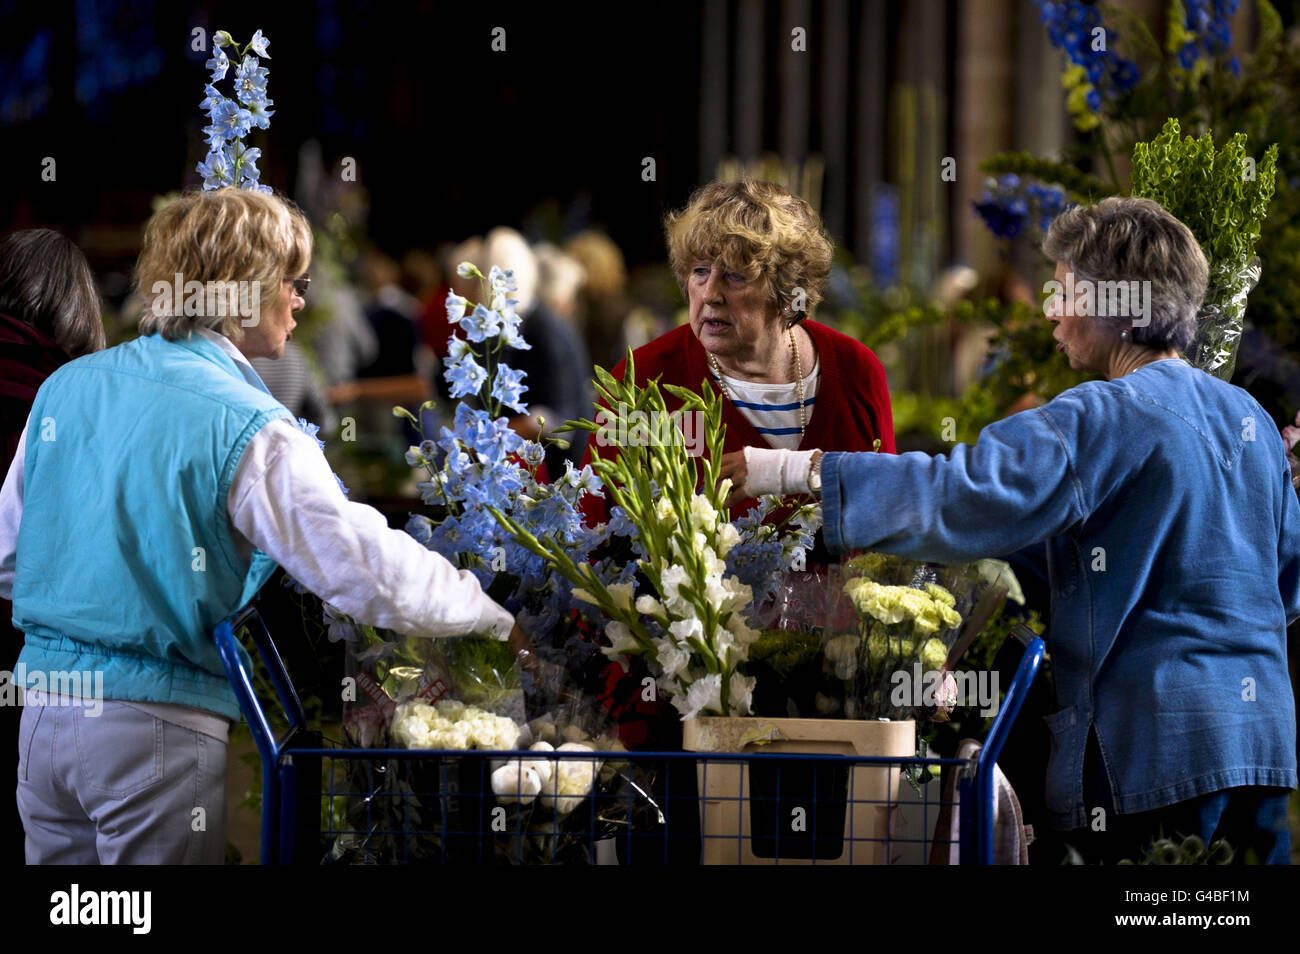 Flower arrangers pick flowers for their floral displays at Salisbury Cathedral as they create its spectacular Flower Festival which opens to the public on Tuesday 14. Around 500 volunteers will bring to life a creative vision, by Chelsea Gold Medalist (2009) Michael Bowyer, assisted by Pam Lewis and Angela Turner, arranging 29,345 stems of flowers, which encompasses the whole interior of the Cathedral. Stock Photo